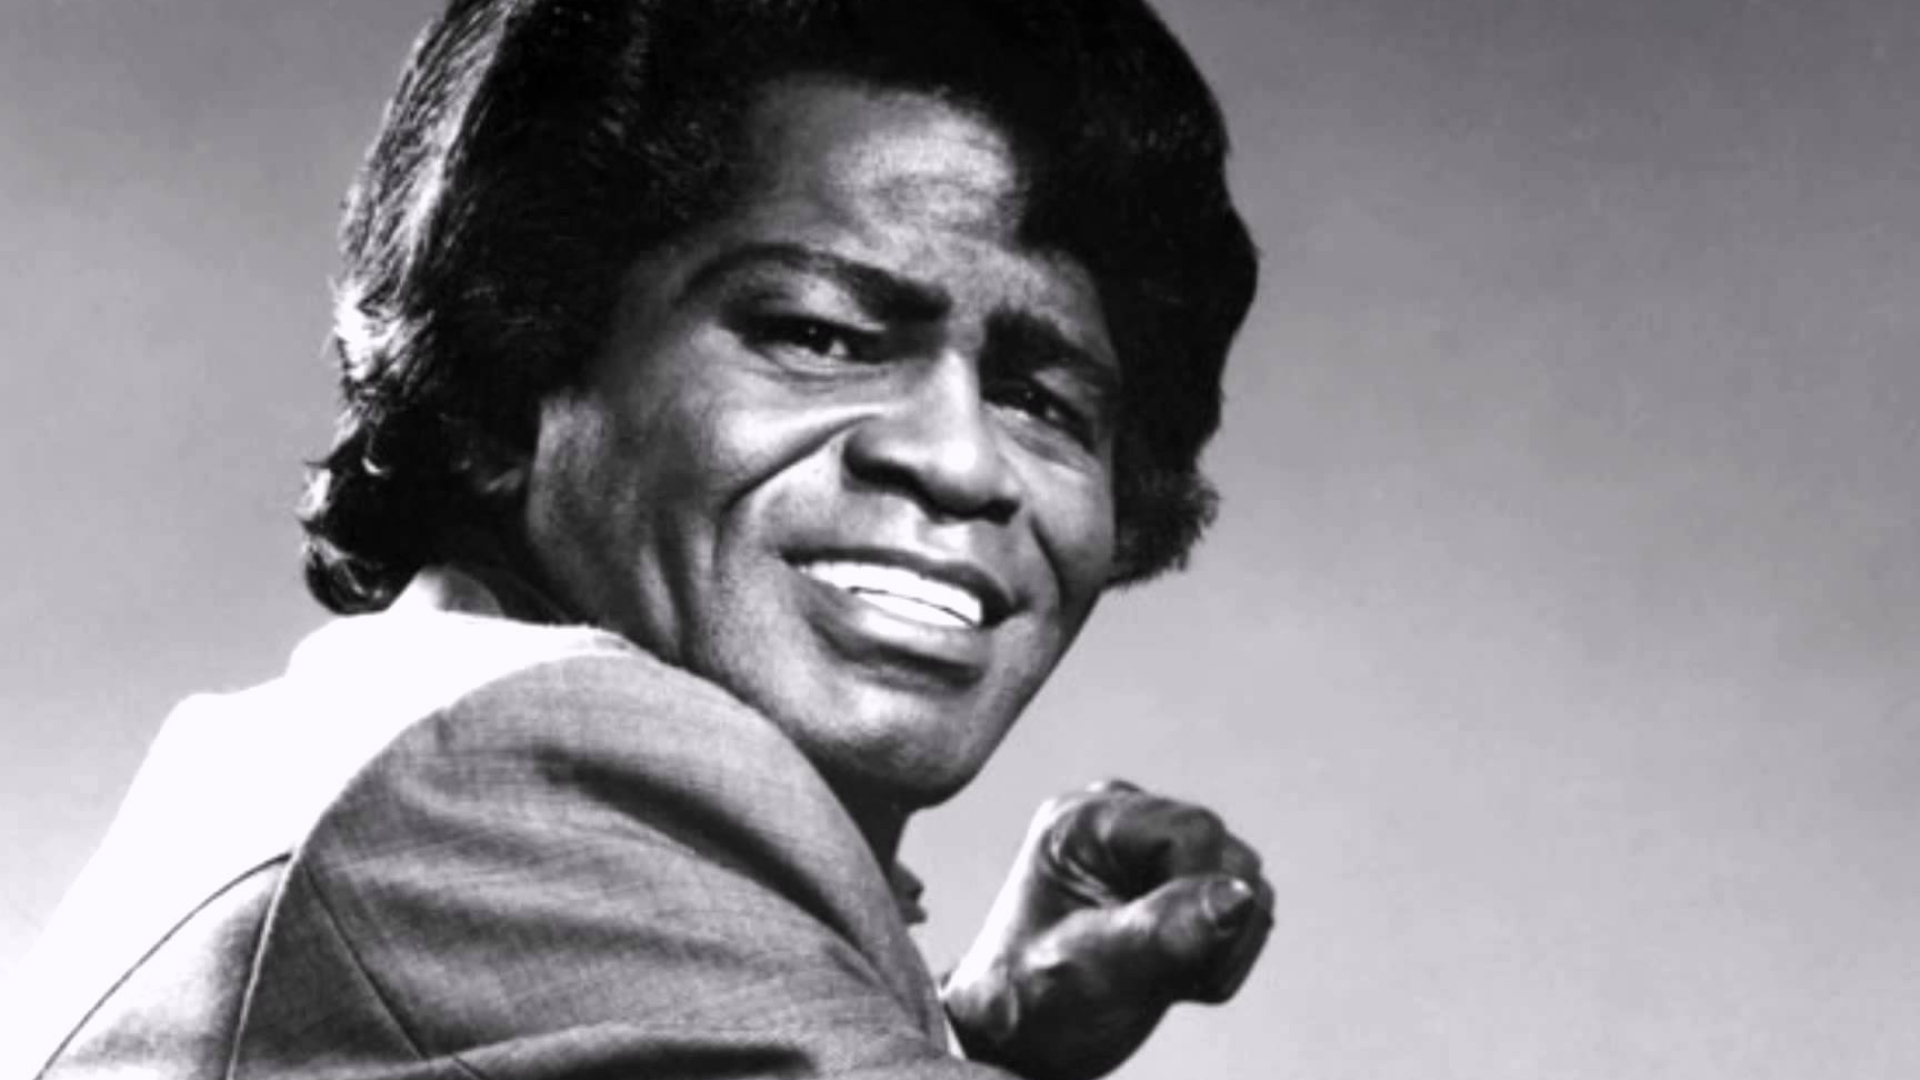 James Brown, High-resolution wallpapers, Downloadable collection, Quality images, 1920x1080 Full HD Desktop